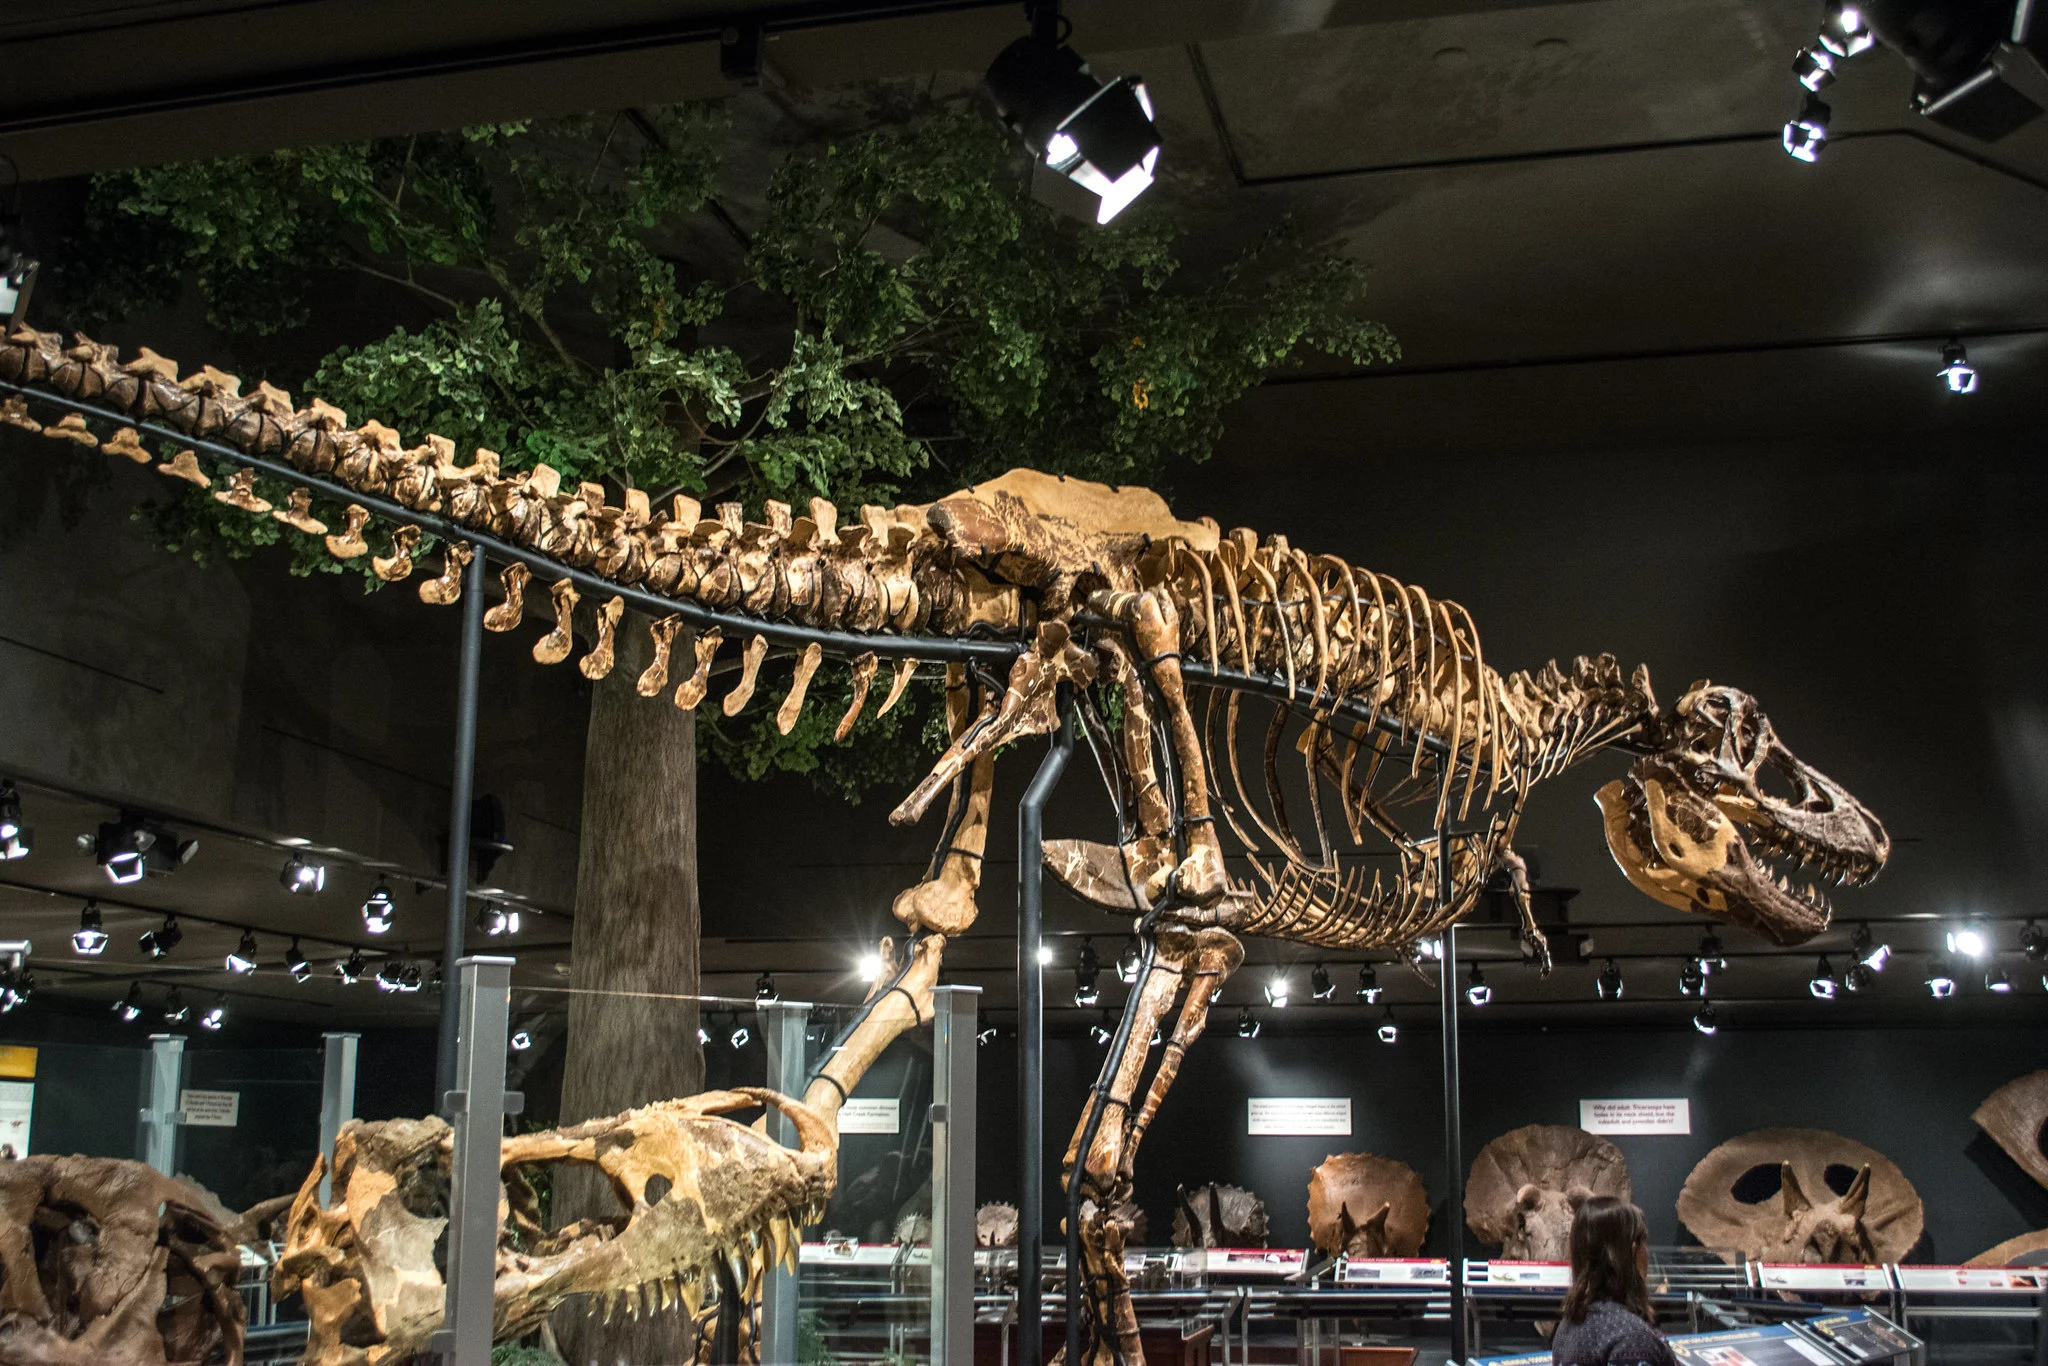 Visiting the ferocious Tyrannosaurus Rex and other dinosaur fossil exhibit inside Museum of the Rockies is one of the best things to do in Montana